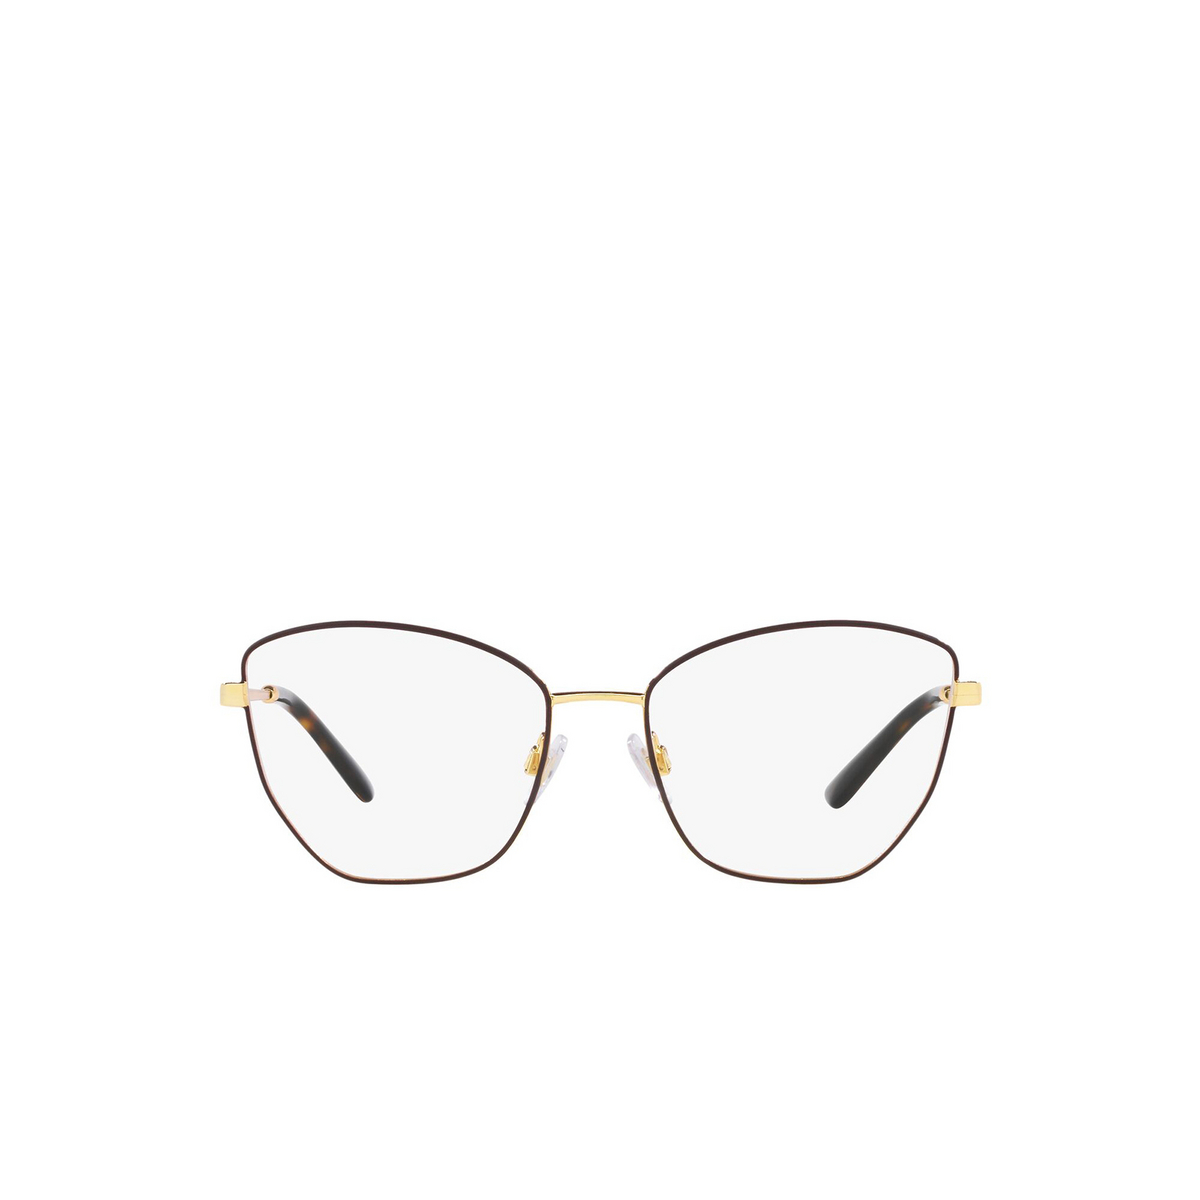 Dolce & Gabbana® Butterfly Eyeglasses: DG1340 color Gold / Matte Brown 1320 - front view.